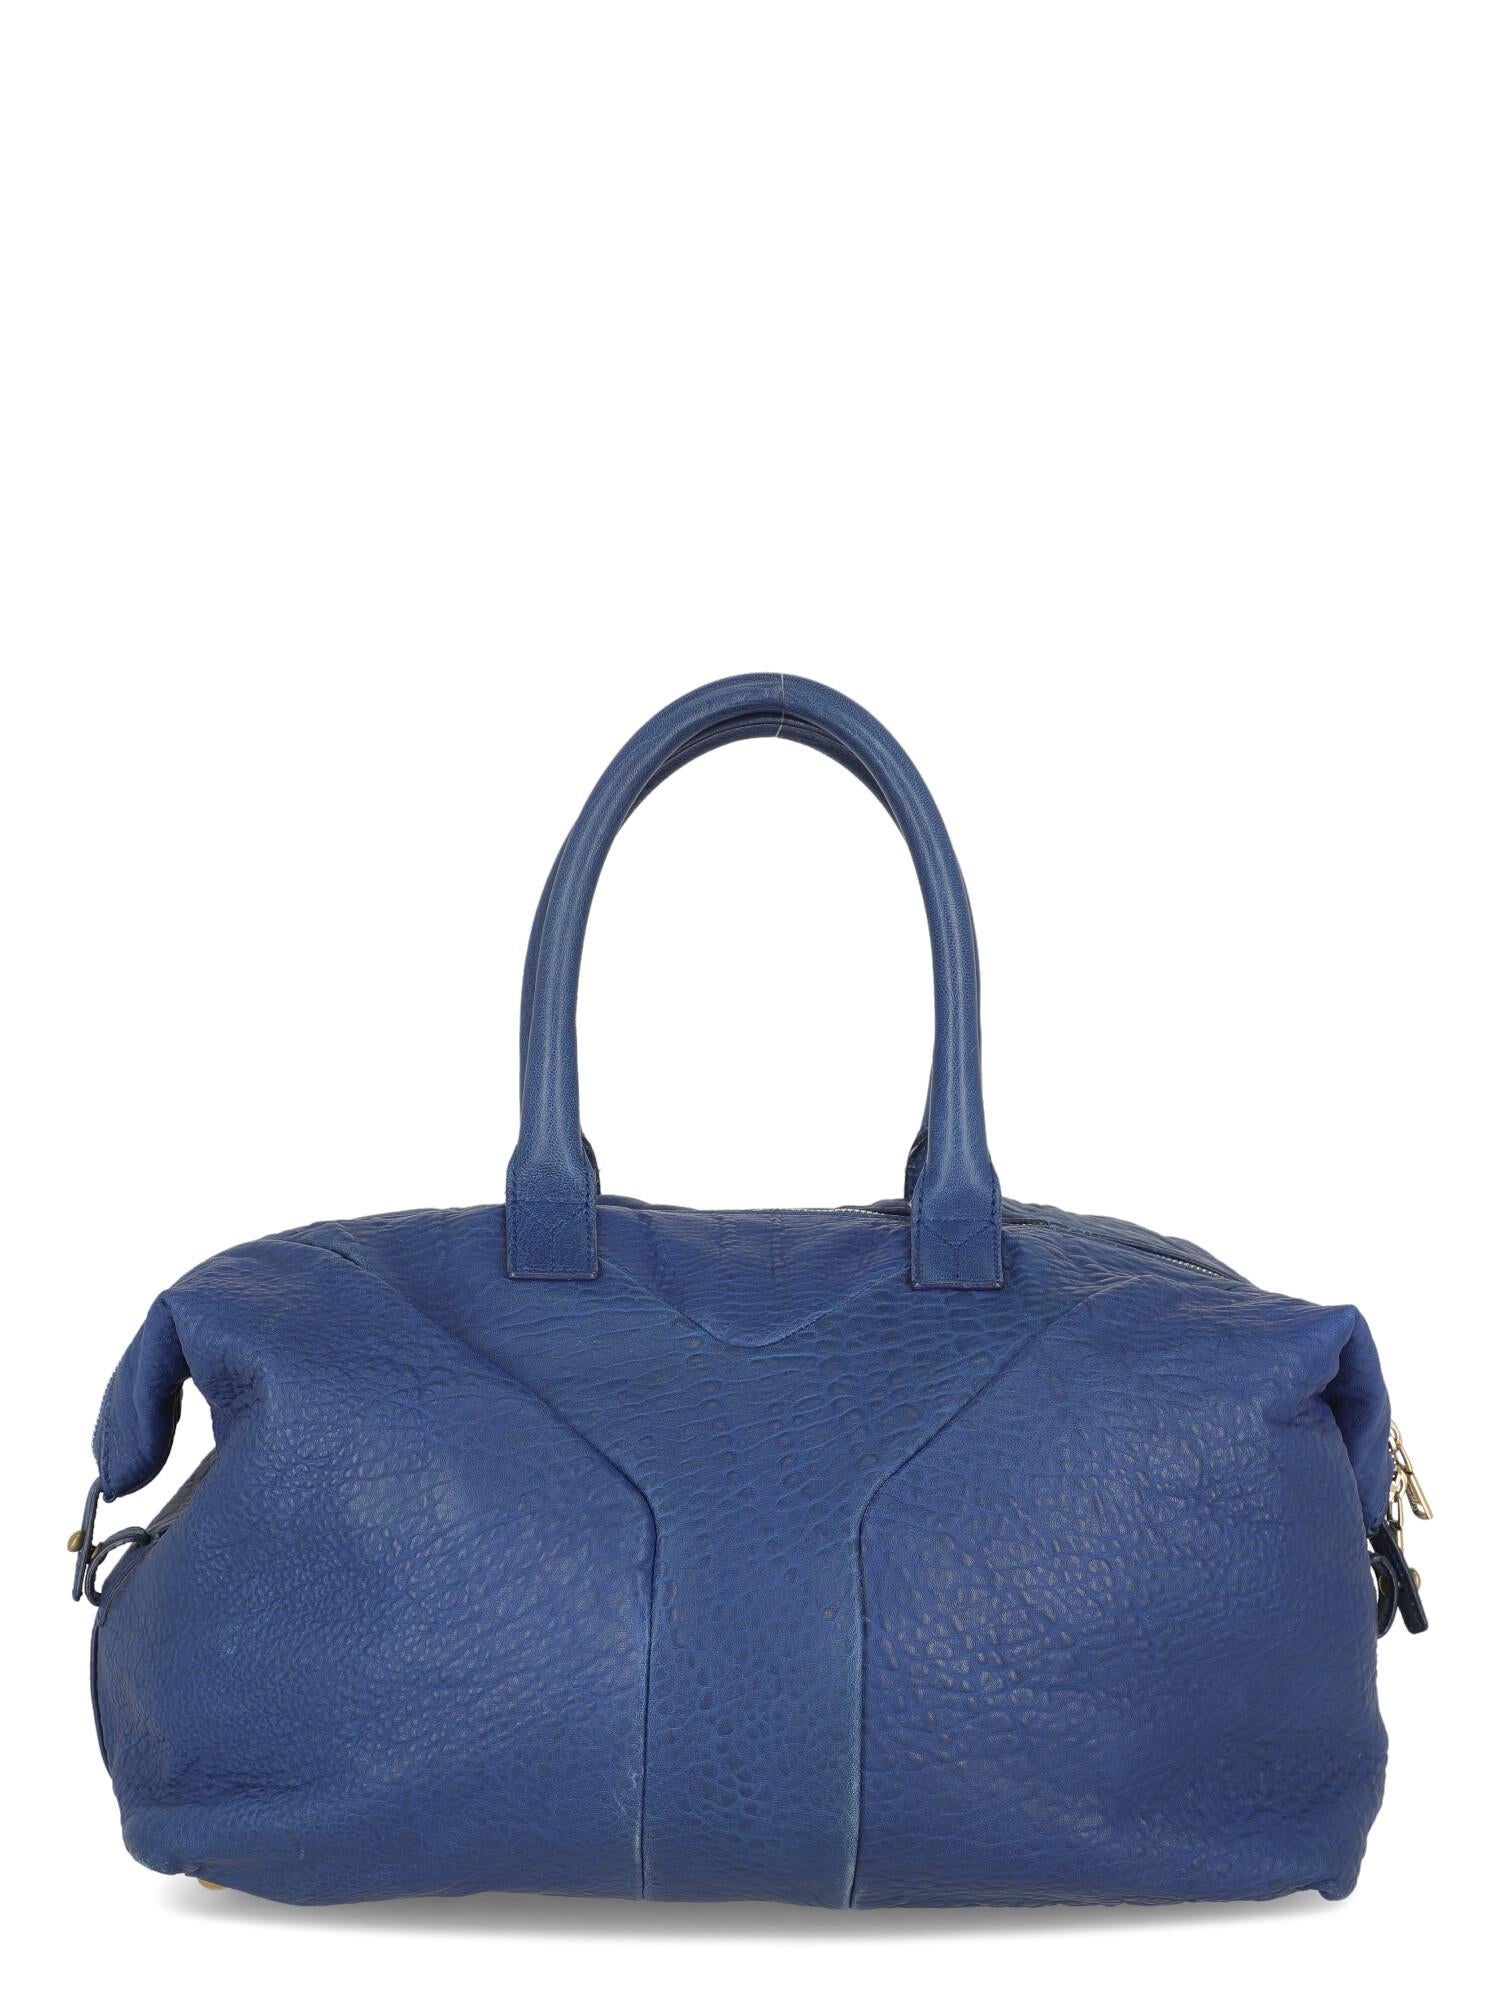 Saint Laurent Woman Handbag Navy Leather In Fair Condition For Sale In Milan, IT